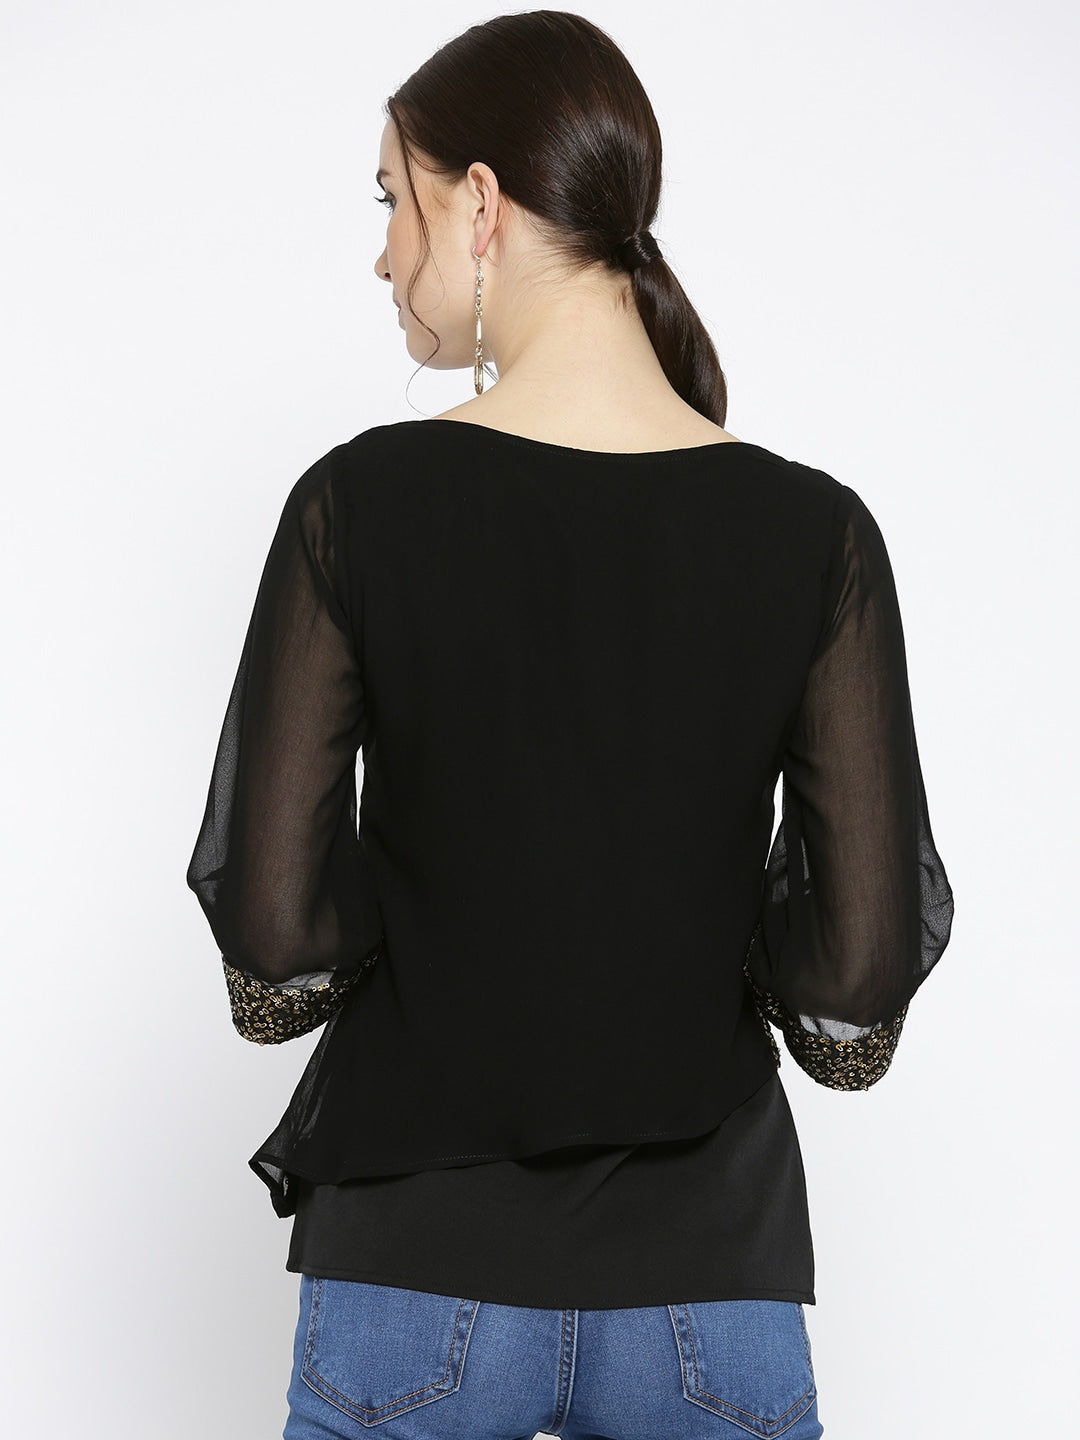 Cottinfab Black Layered Top with Sequinned Detail